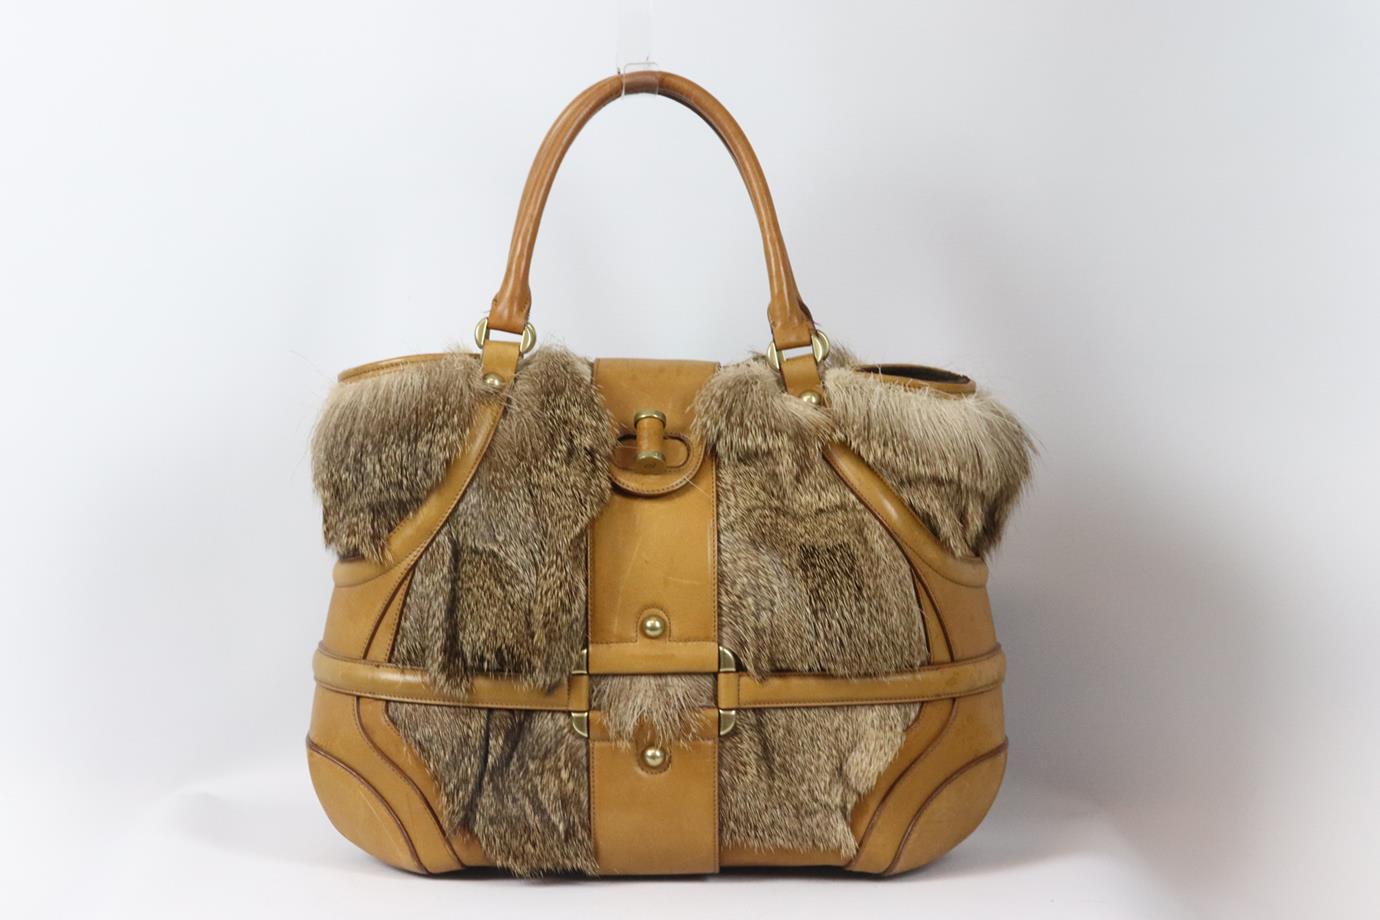 Alexander McQueen Novak fur and leather tote bag. Beige and brown. Twist lock fastening at front. Does not come with dusbtag or box. Height: 12 in. Width: 16 in. Depth: 5.75 in. Handle Drop: 5.5 in. Fair condition - Fur shedding slightly. Scuffs and